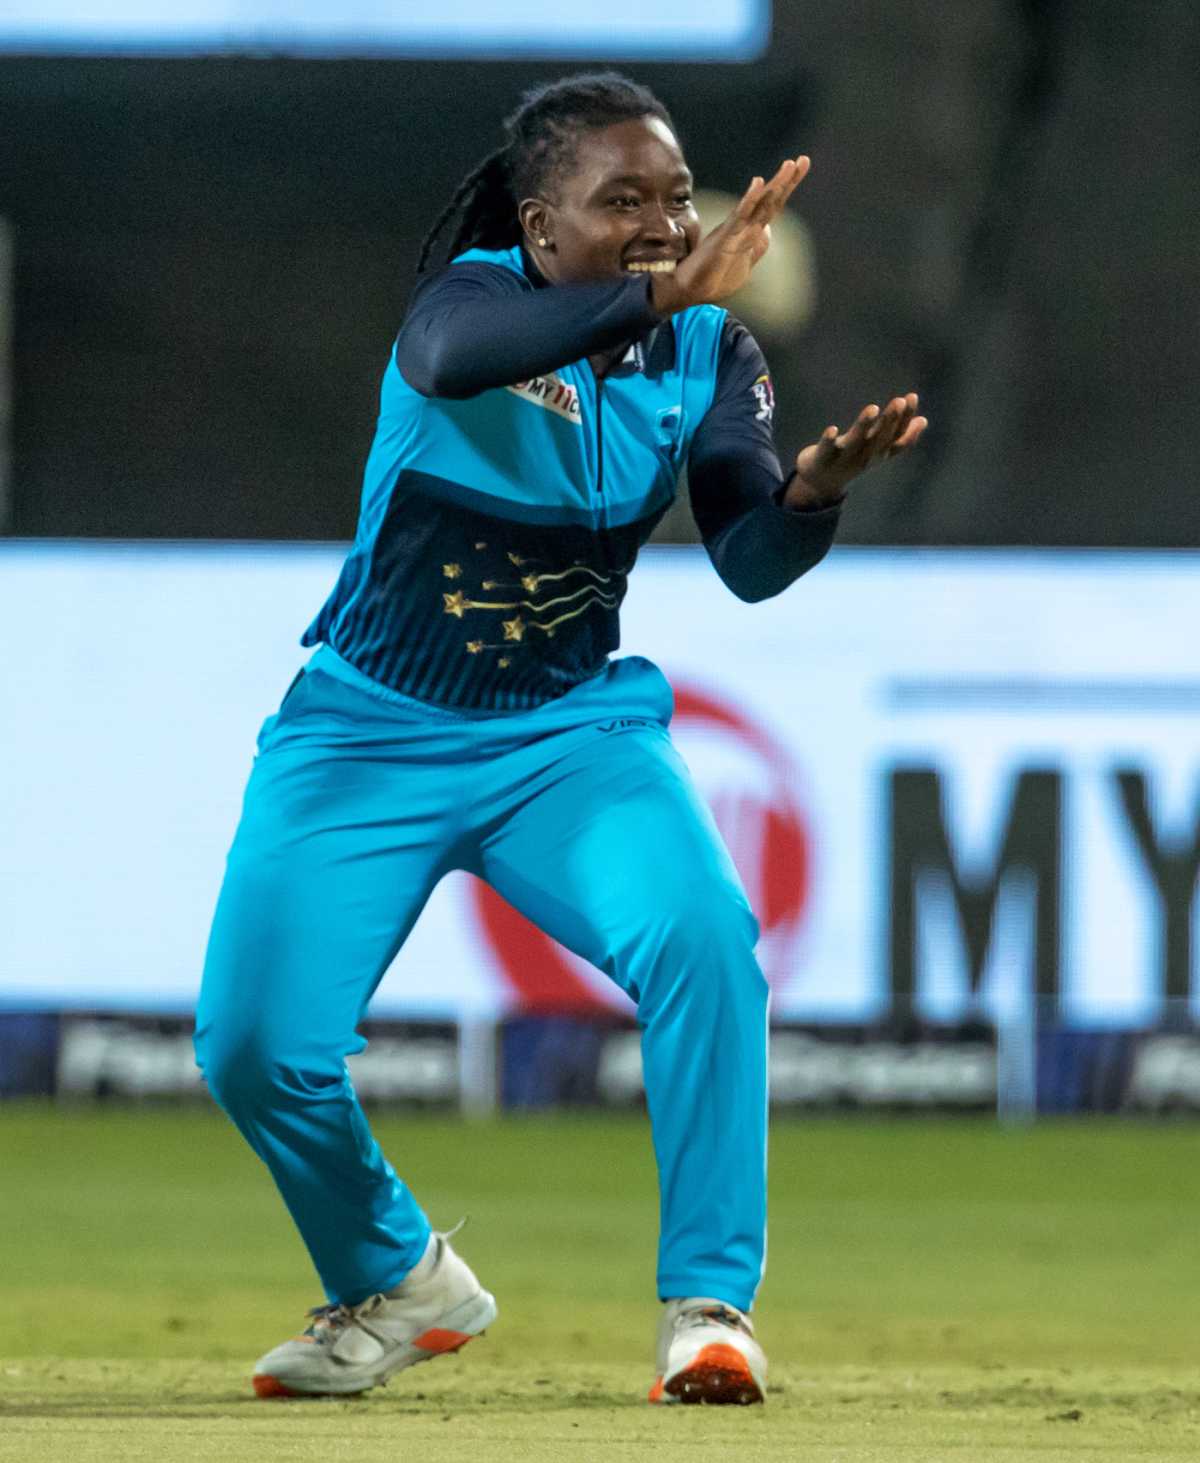 Deandra Dottin is ecstatic after picking up the wicket of Shafali Verma in the final